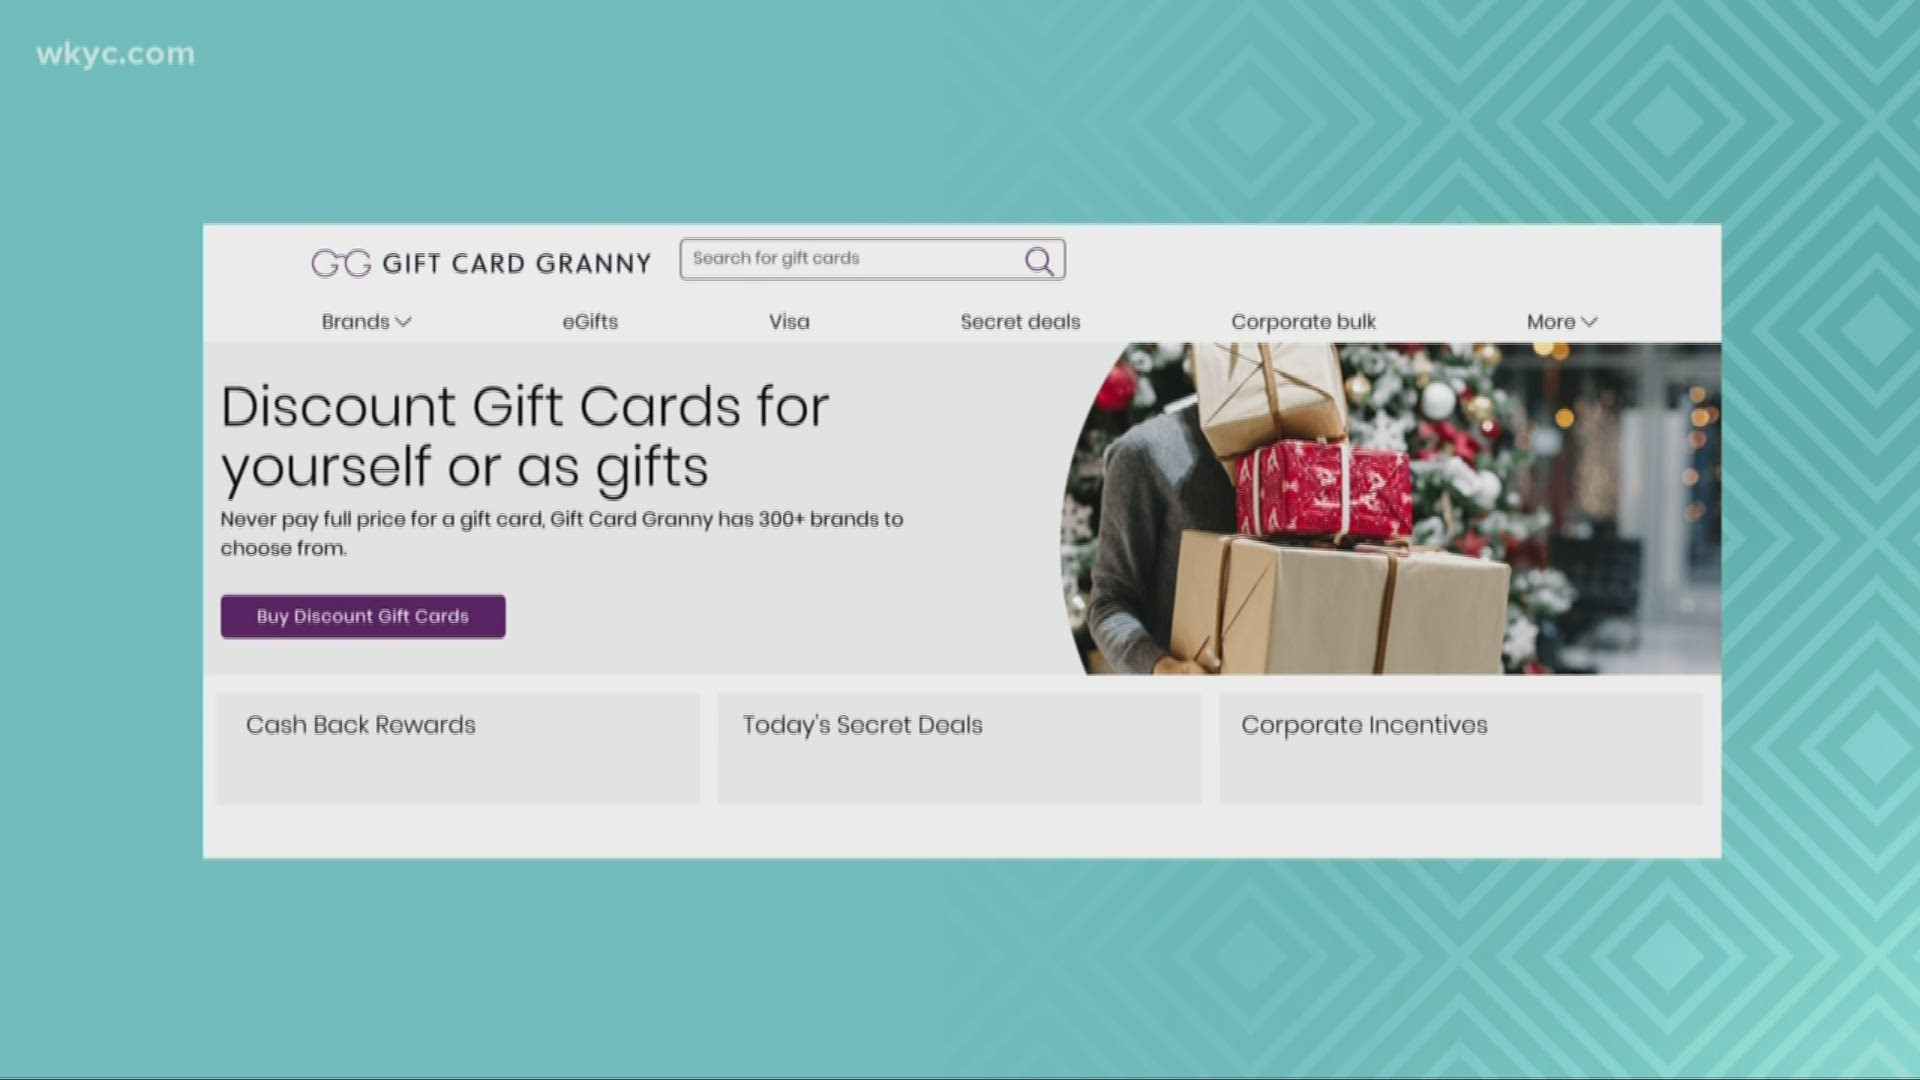 The holiday season is still ramping up for retailers as we hurry to use our new gift cards. What do you do if you got one that you don't plan to use?